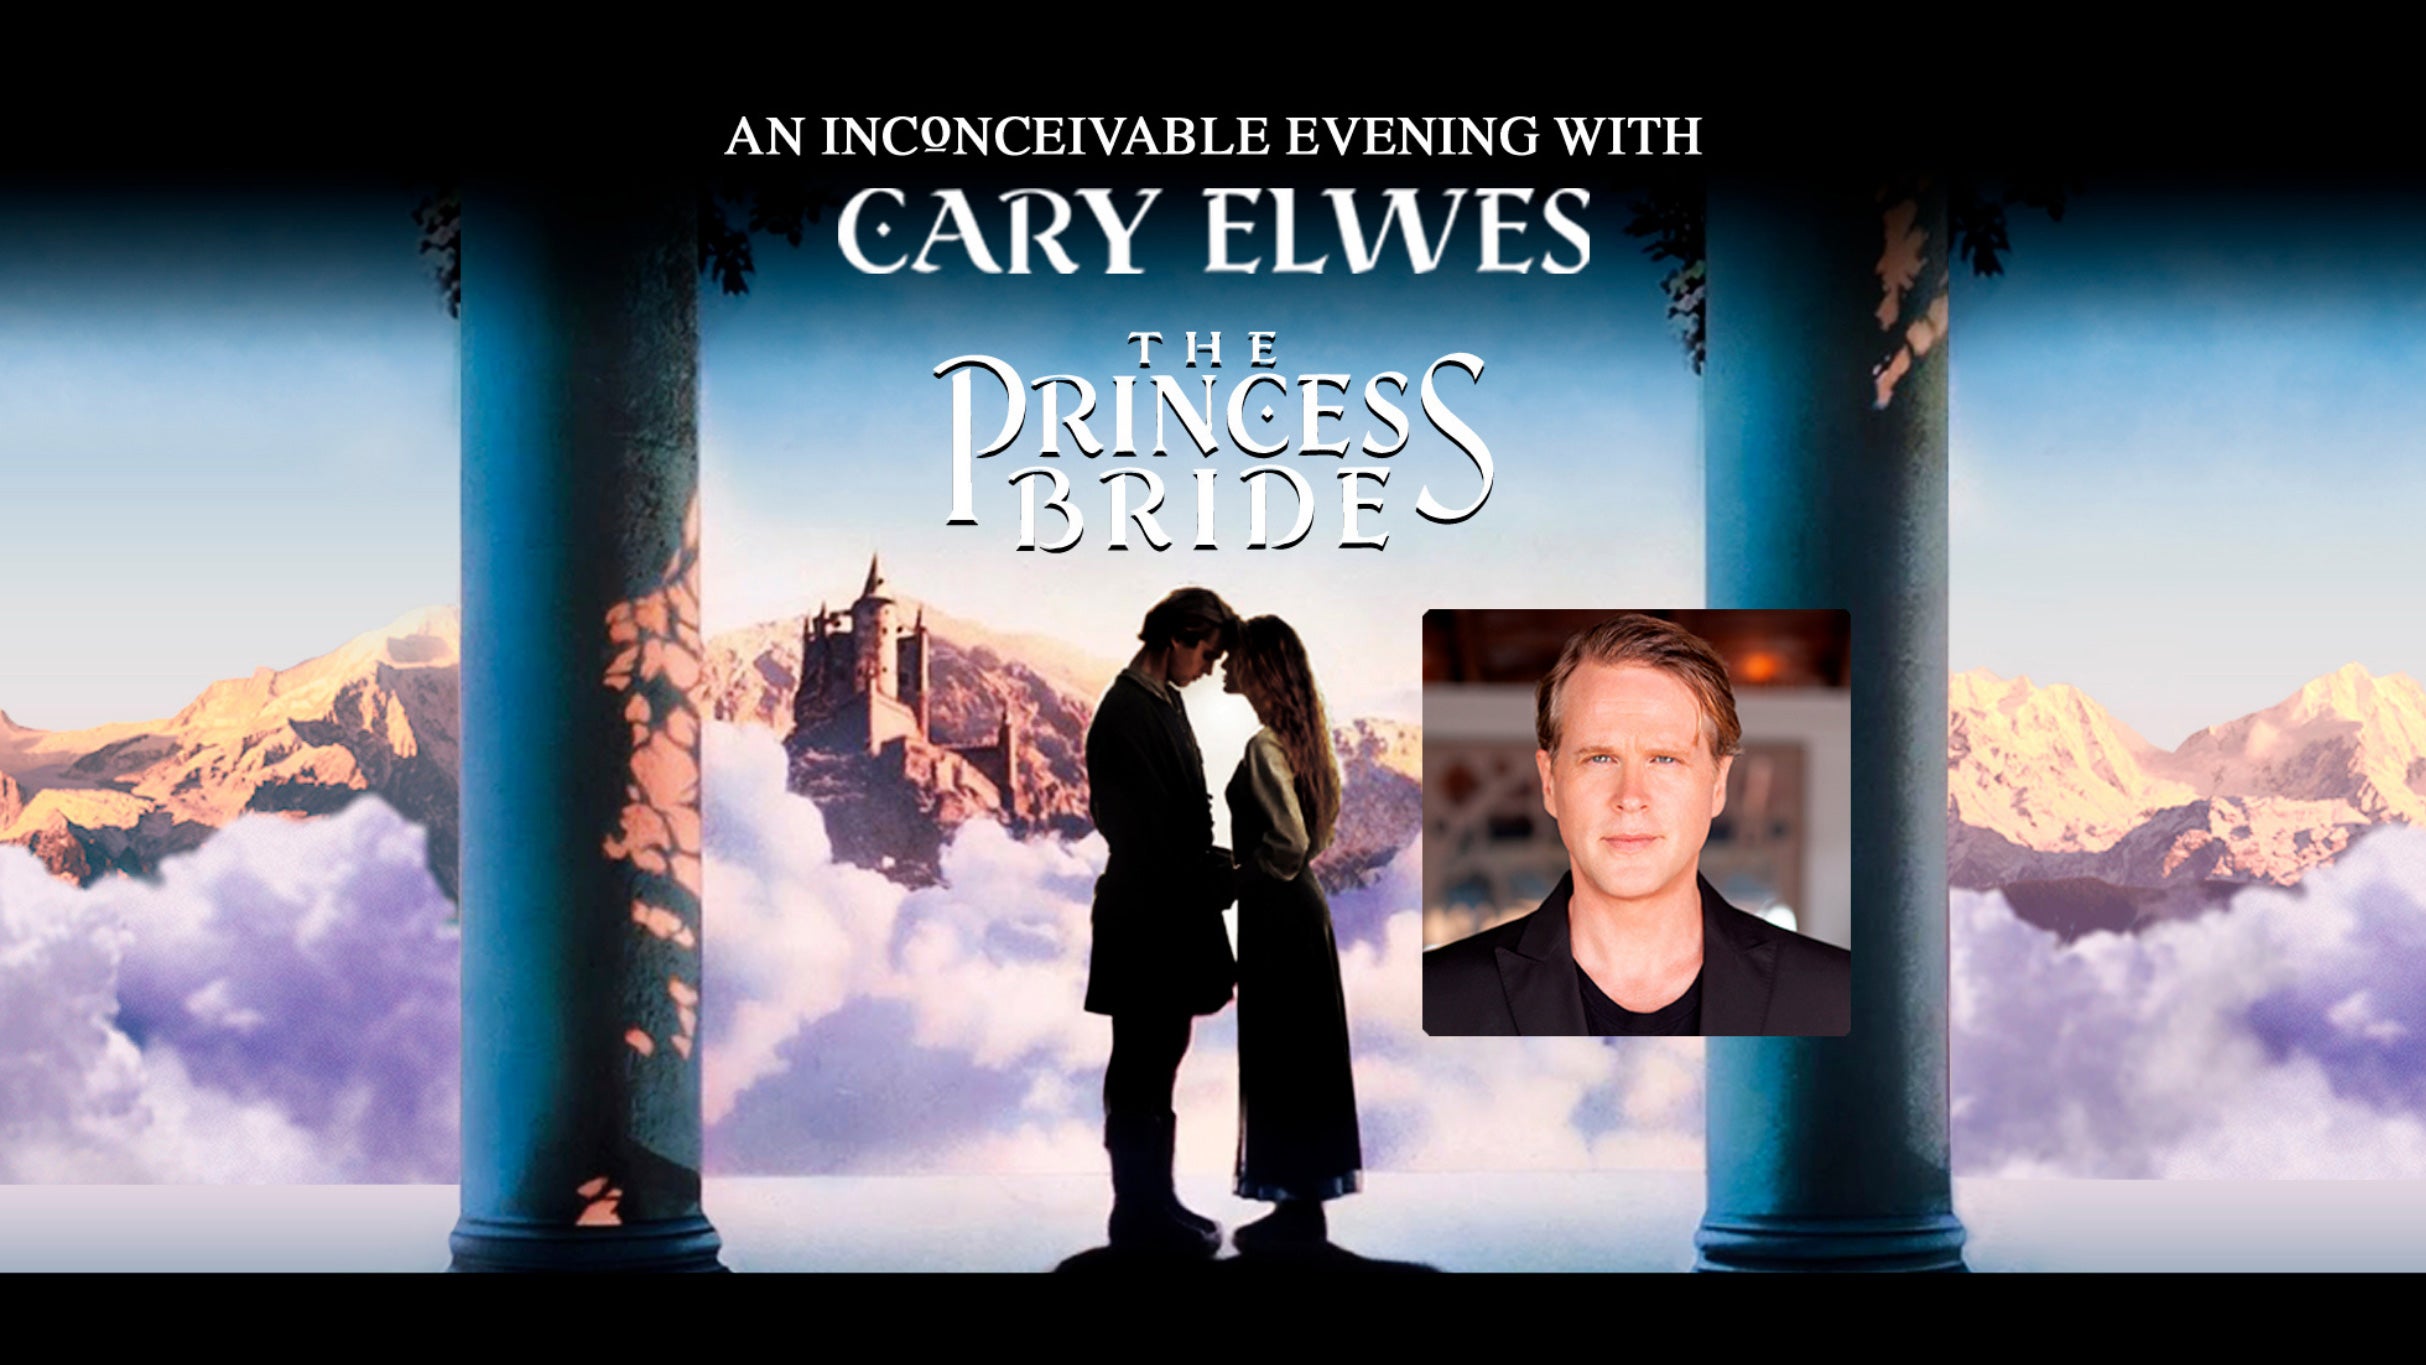 The Princess Bride: An Inconceivable Evening with Cary Elwes in Stamford promo photo for Live Nation presale offer code